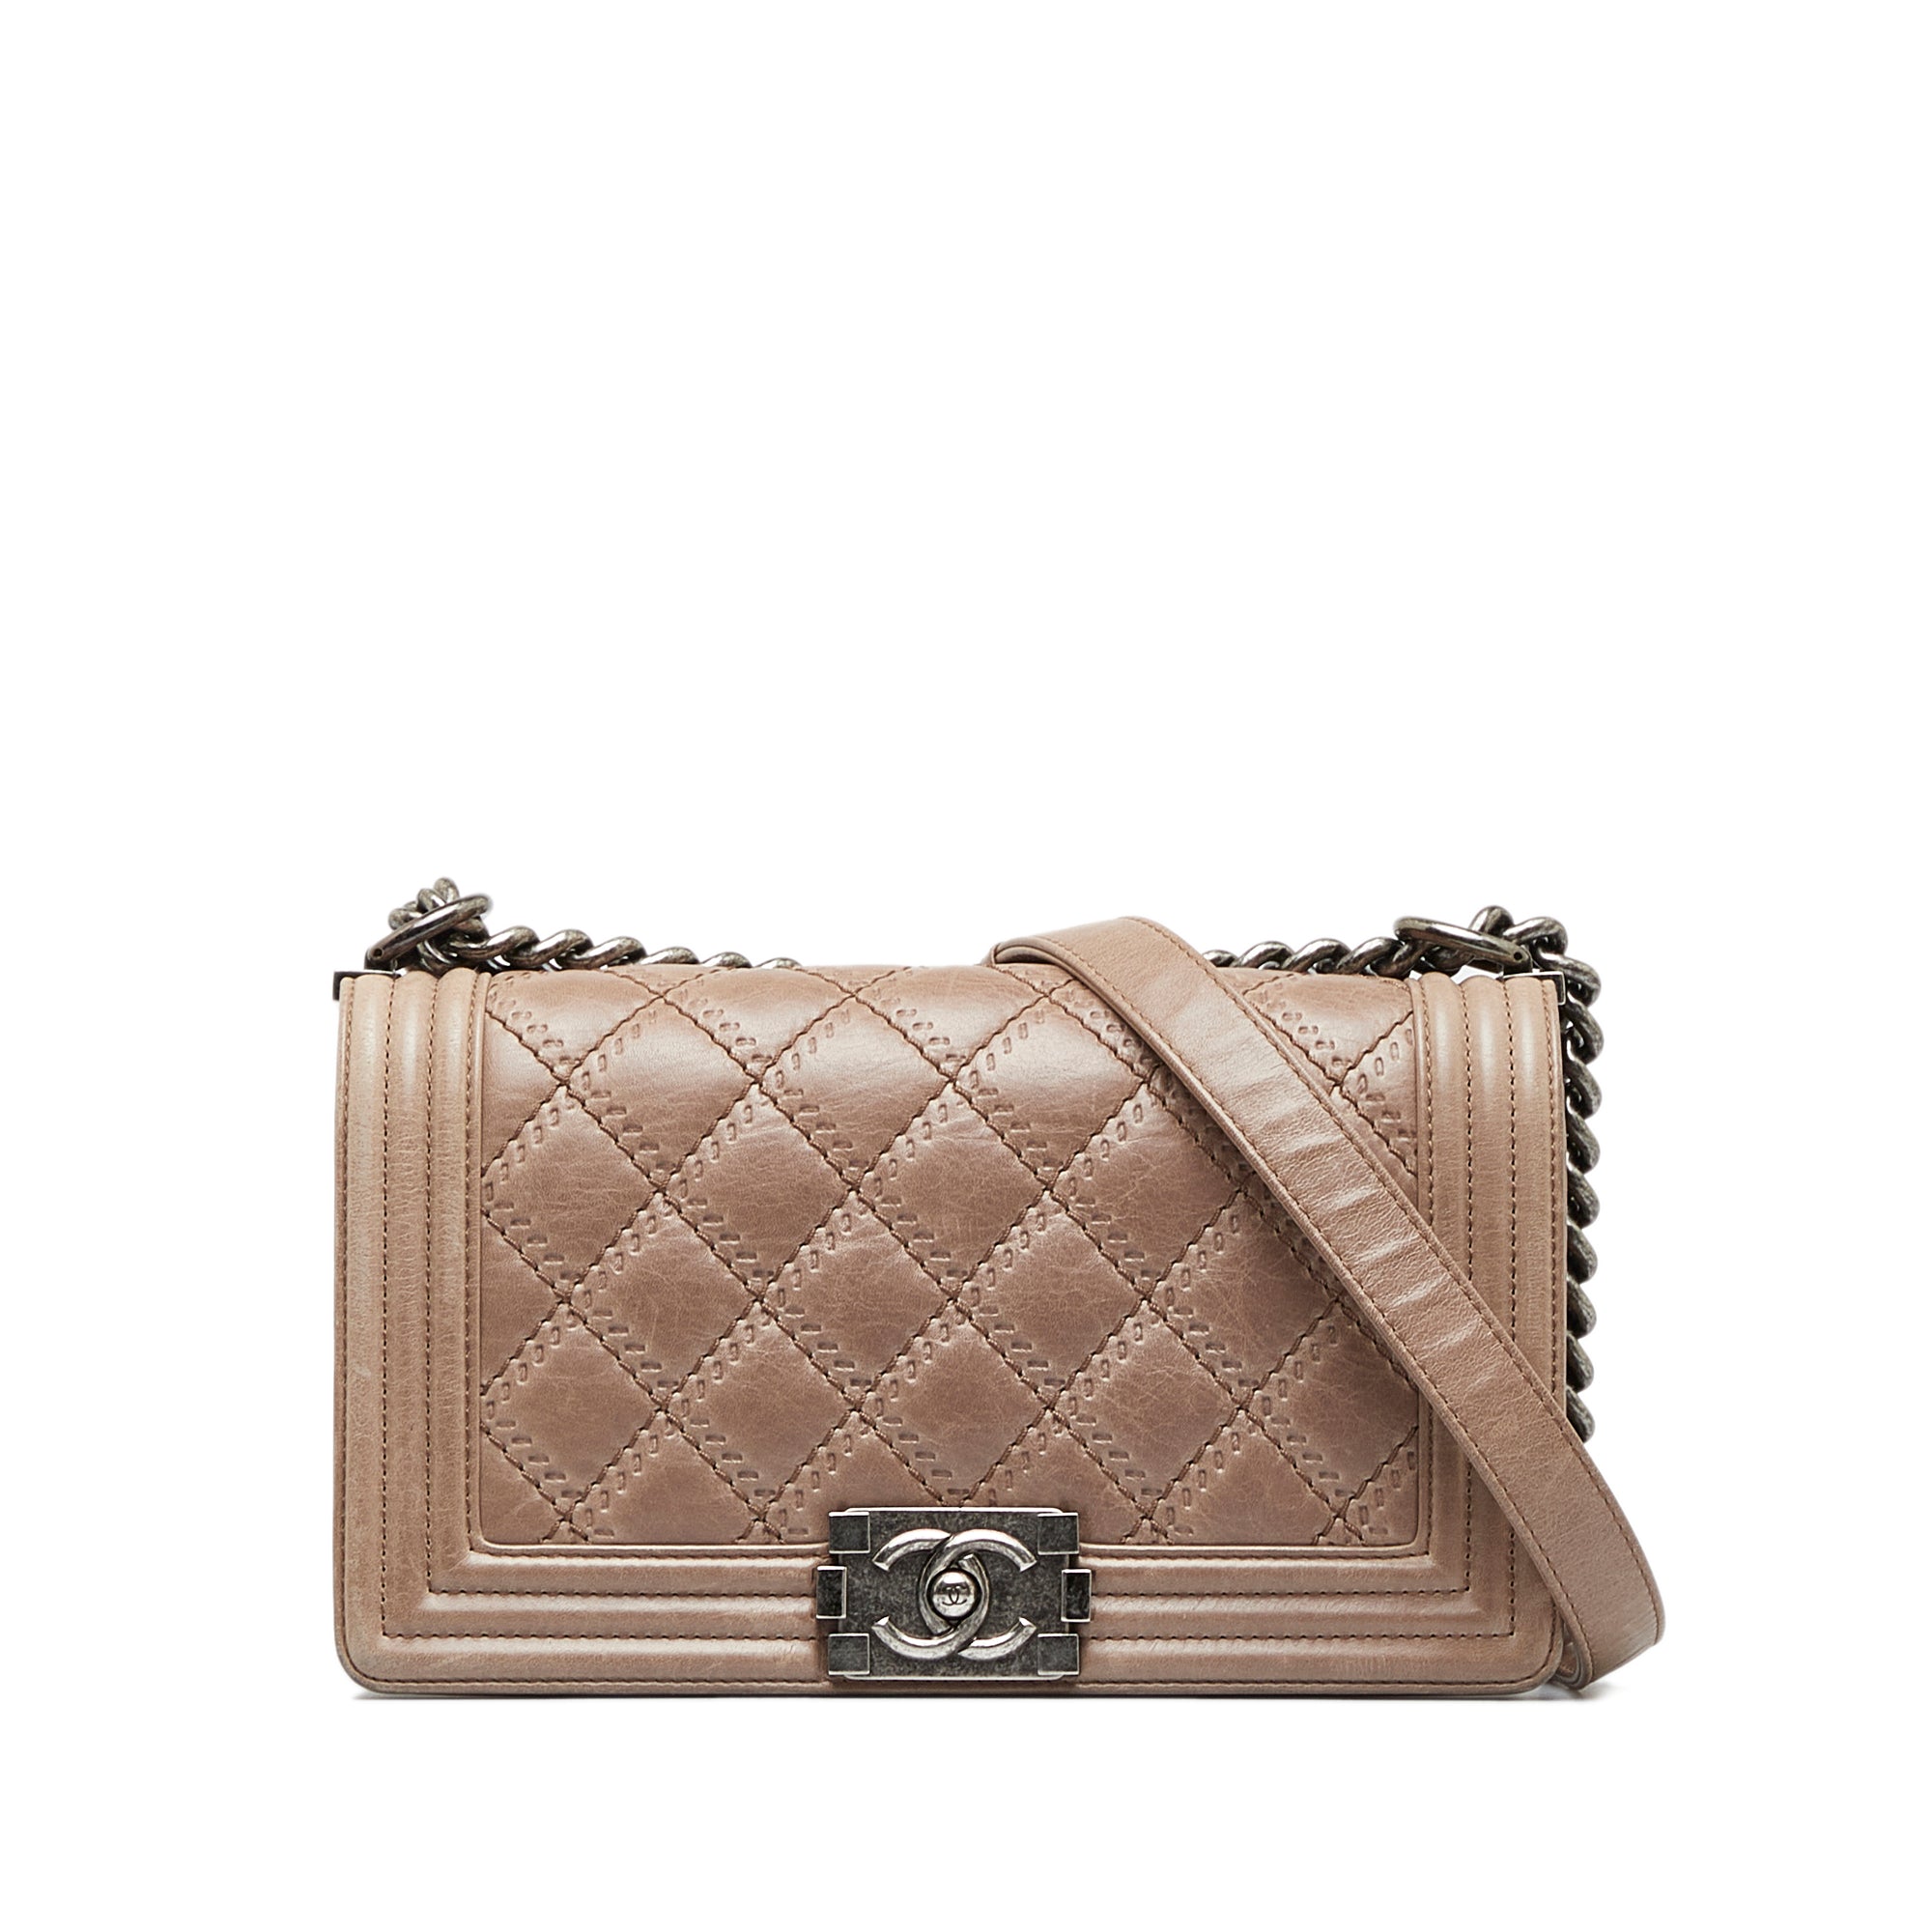 Chanel Quilted SHW CC Chain Shoulder Bag Calfskin Leather Brown